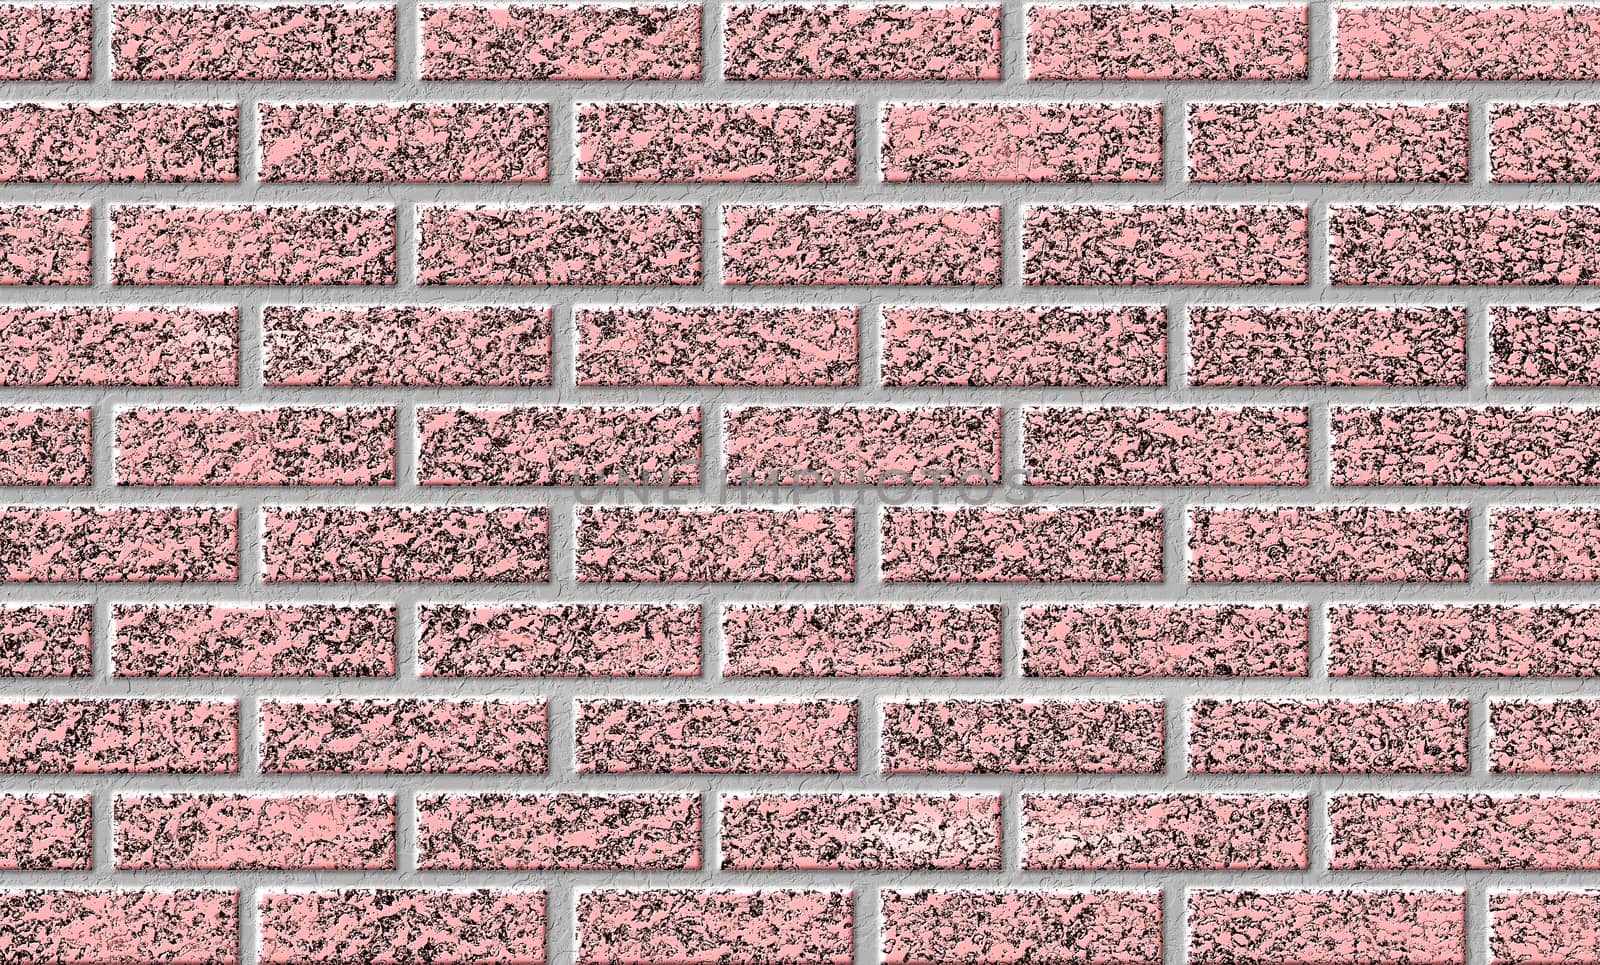 Brick wall illustration. Pink textured background. Pattern of decorative wall surface